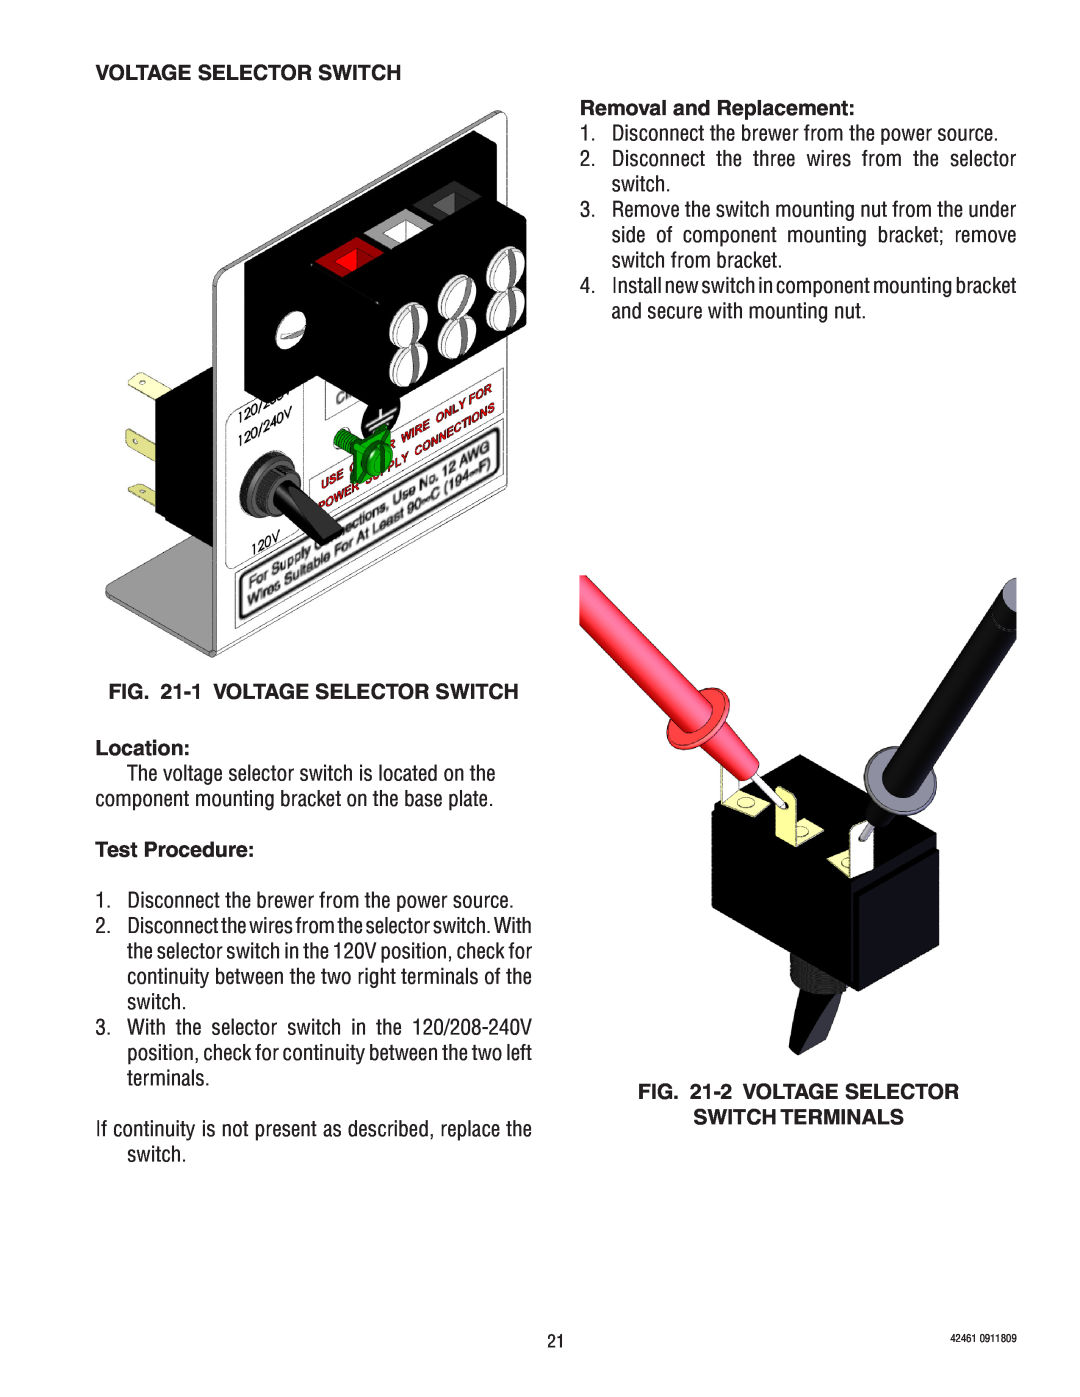 Bunn ITB/ITCB manual VOLTAGE SELECTOR SWITCH -1 VOLTAGE SELECTOR SWITCH Location, Test Procedure, Removal and Replacement 